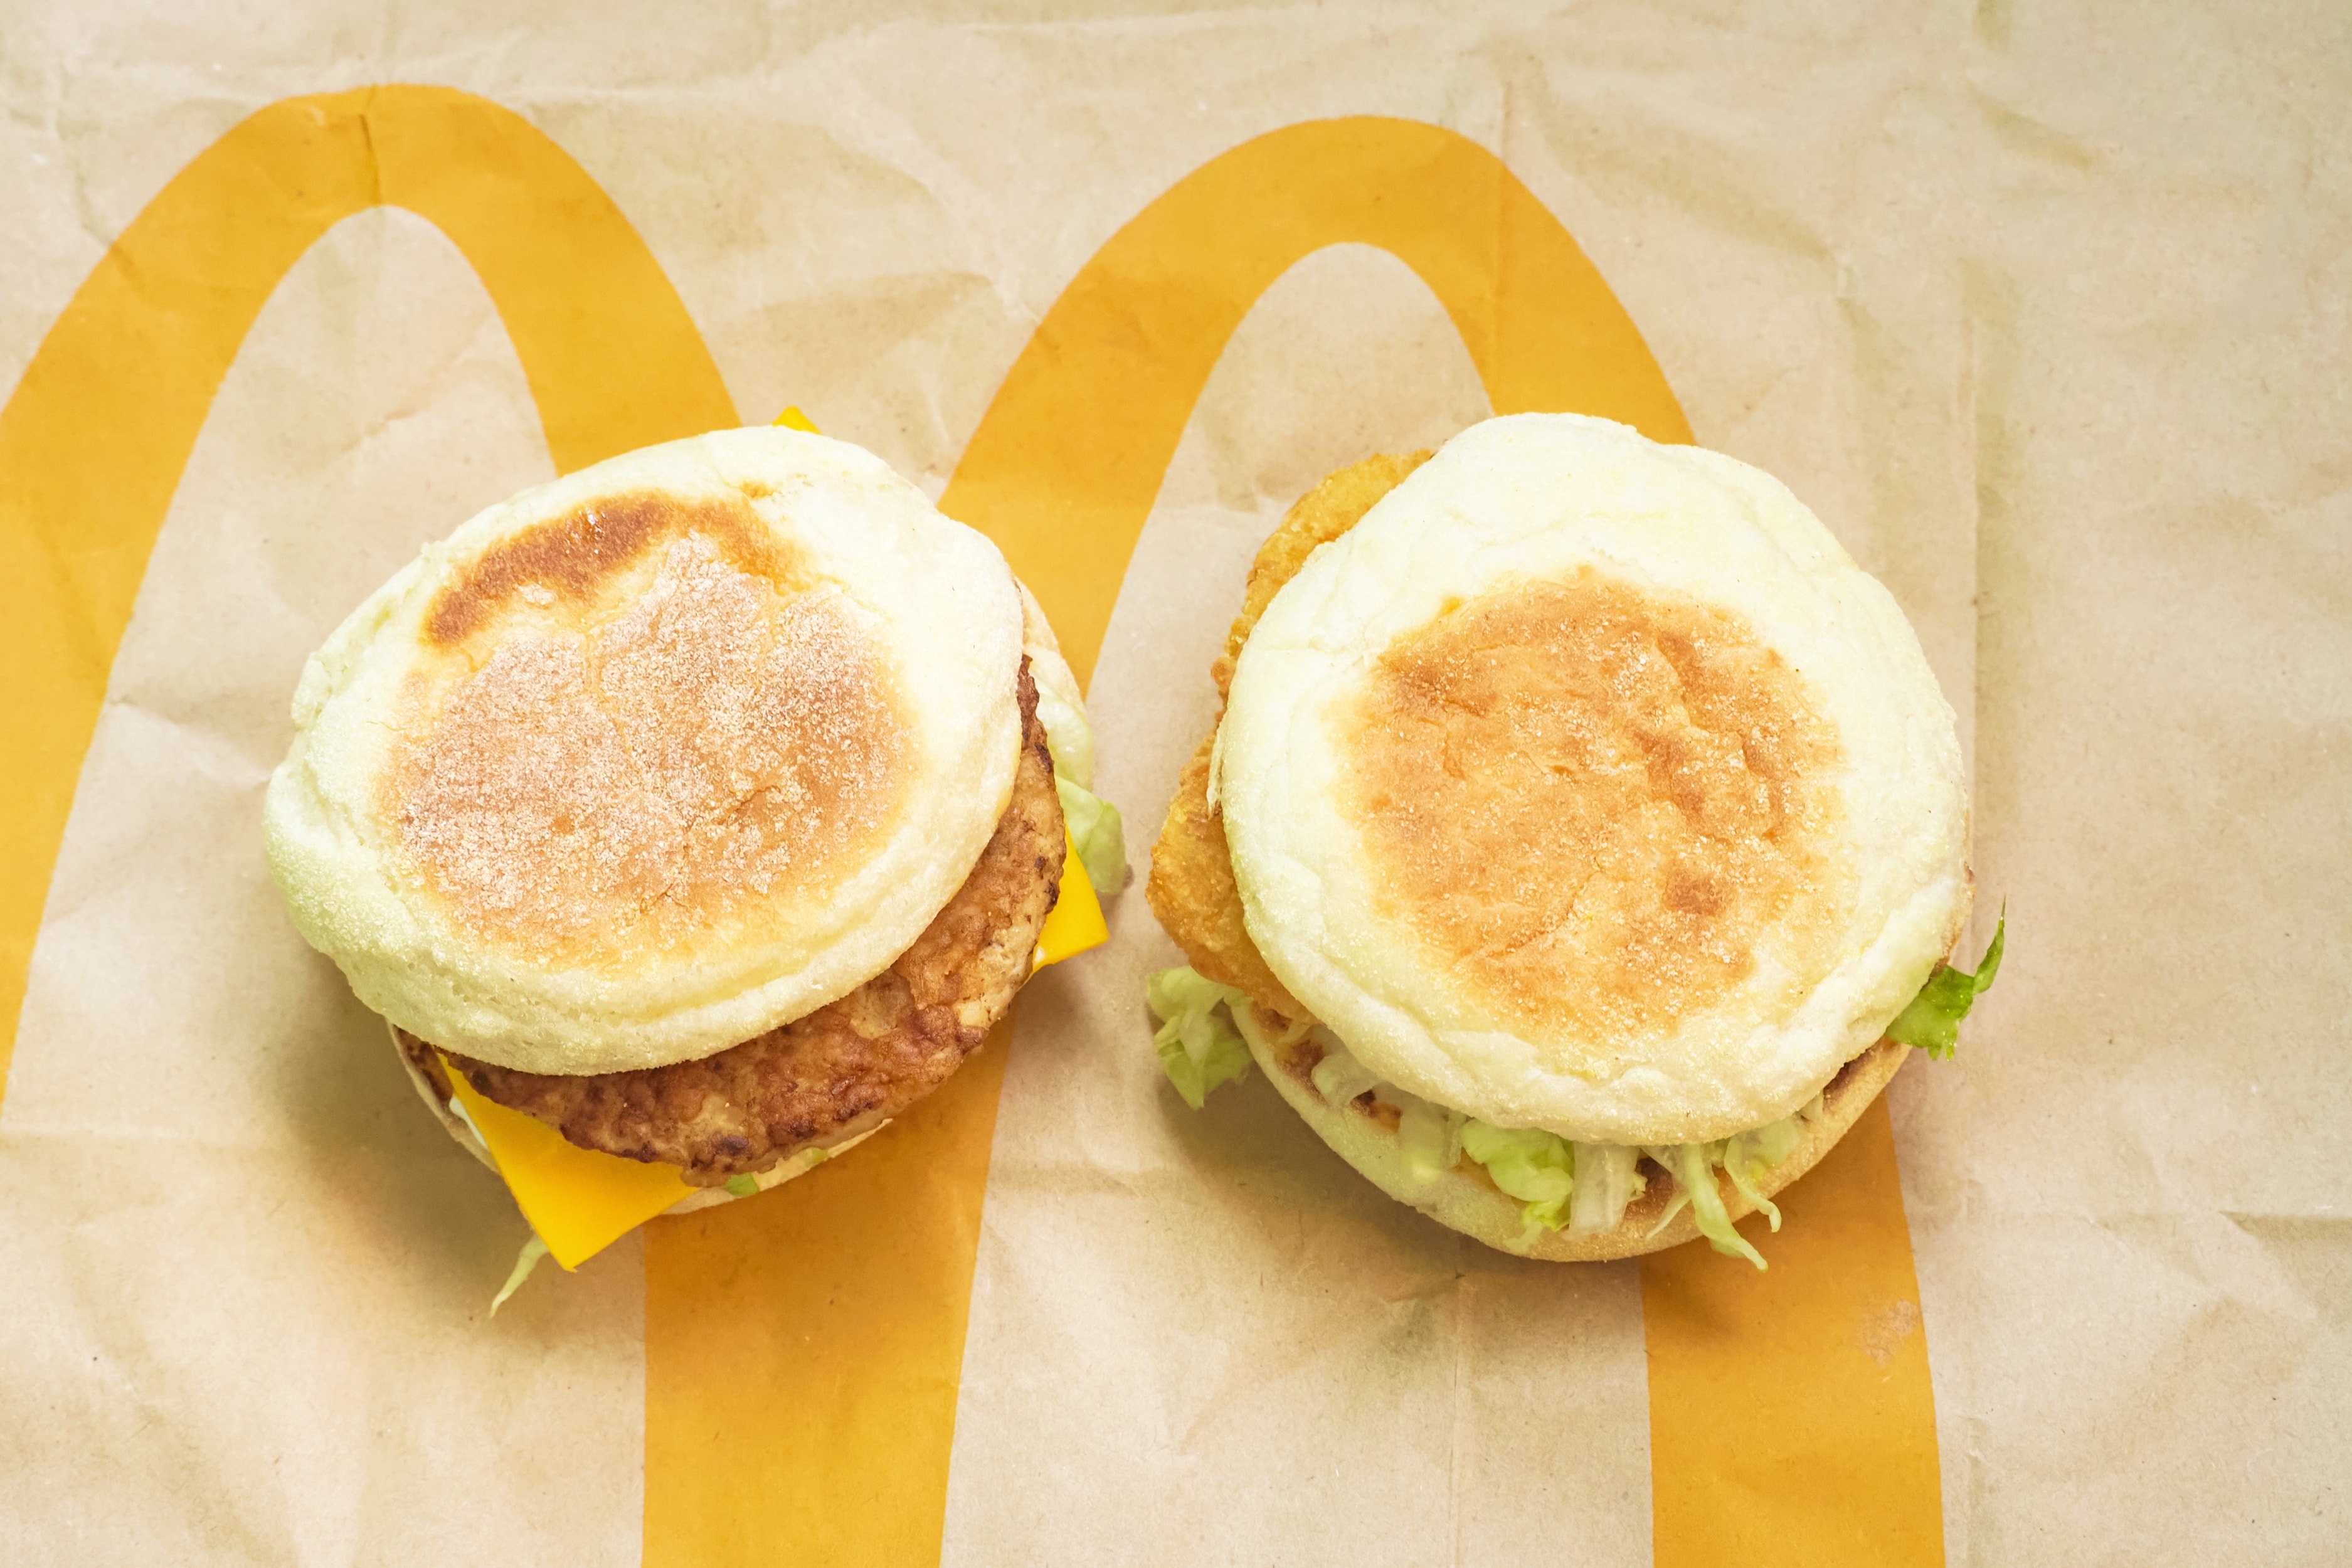 Australia Fines Passenger $1,800 For Bringing 2 Undeclared McMuffins Into The Country